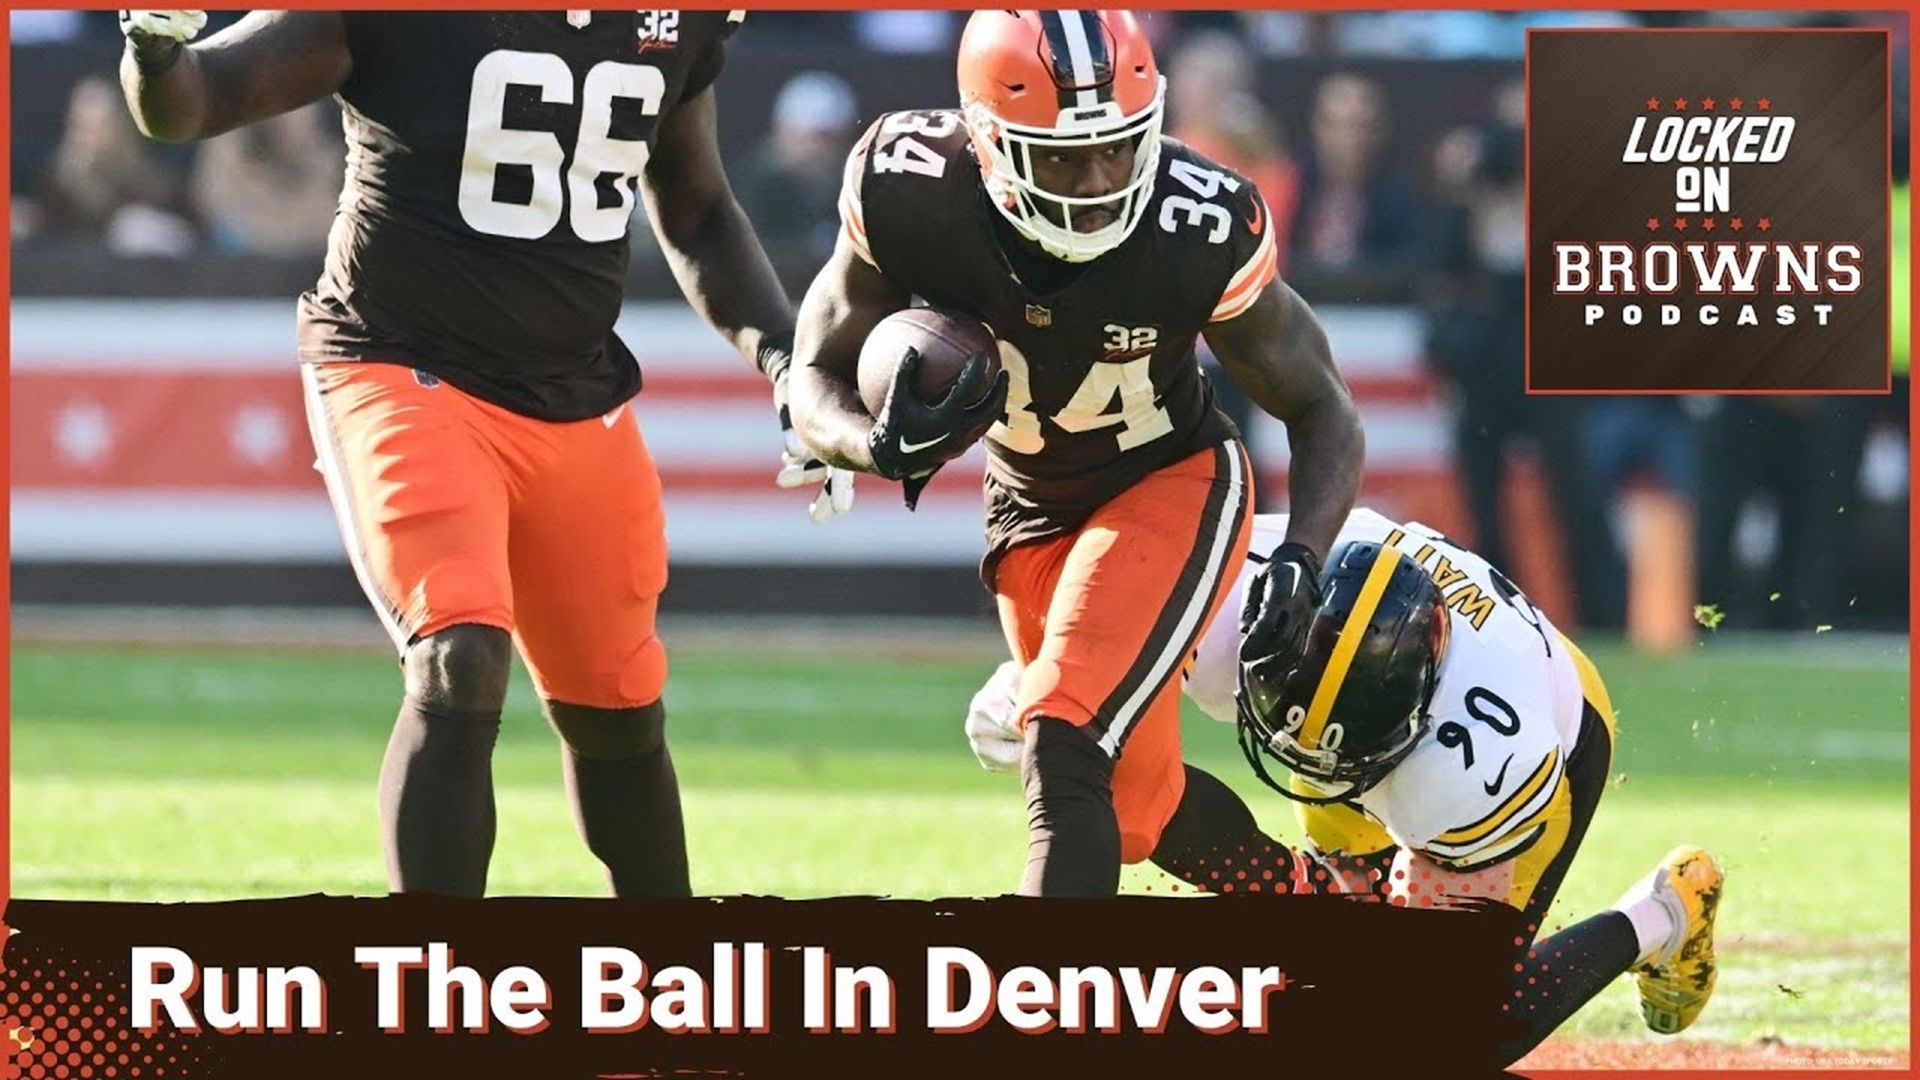 We talk the biggest storylines as the Browns are breaking in rookie QB Dorian Thompson-Robinson, & the Broncos are seeing Russell Wilson round back into form.